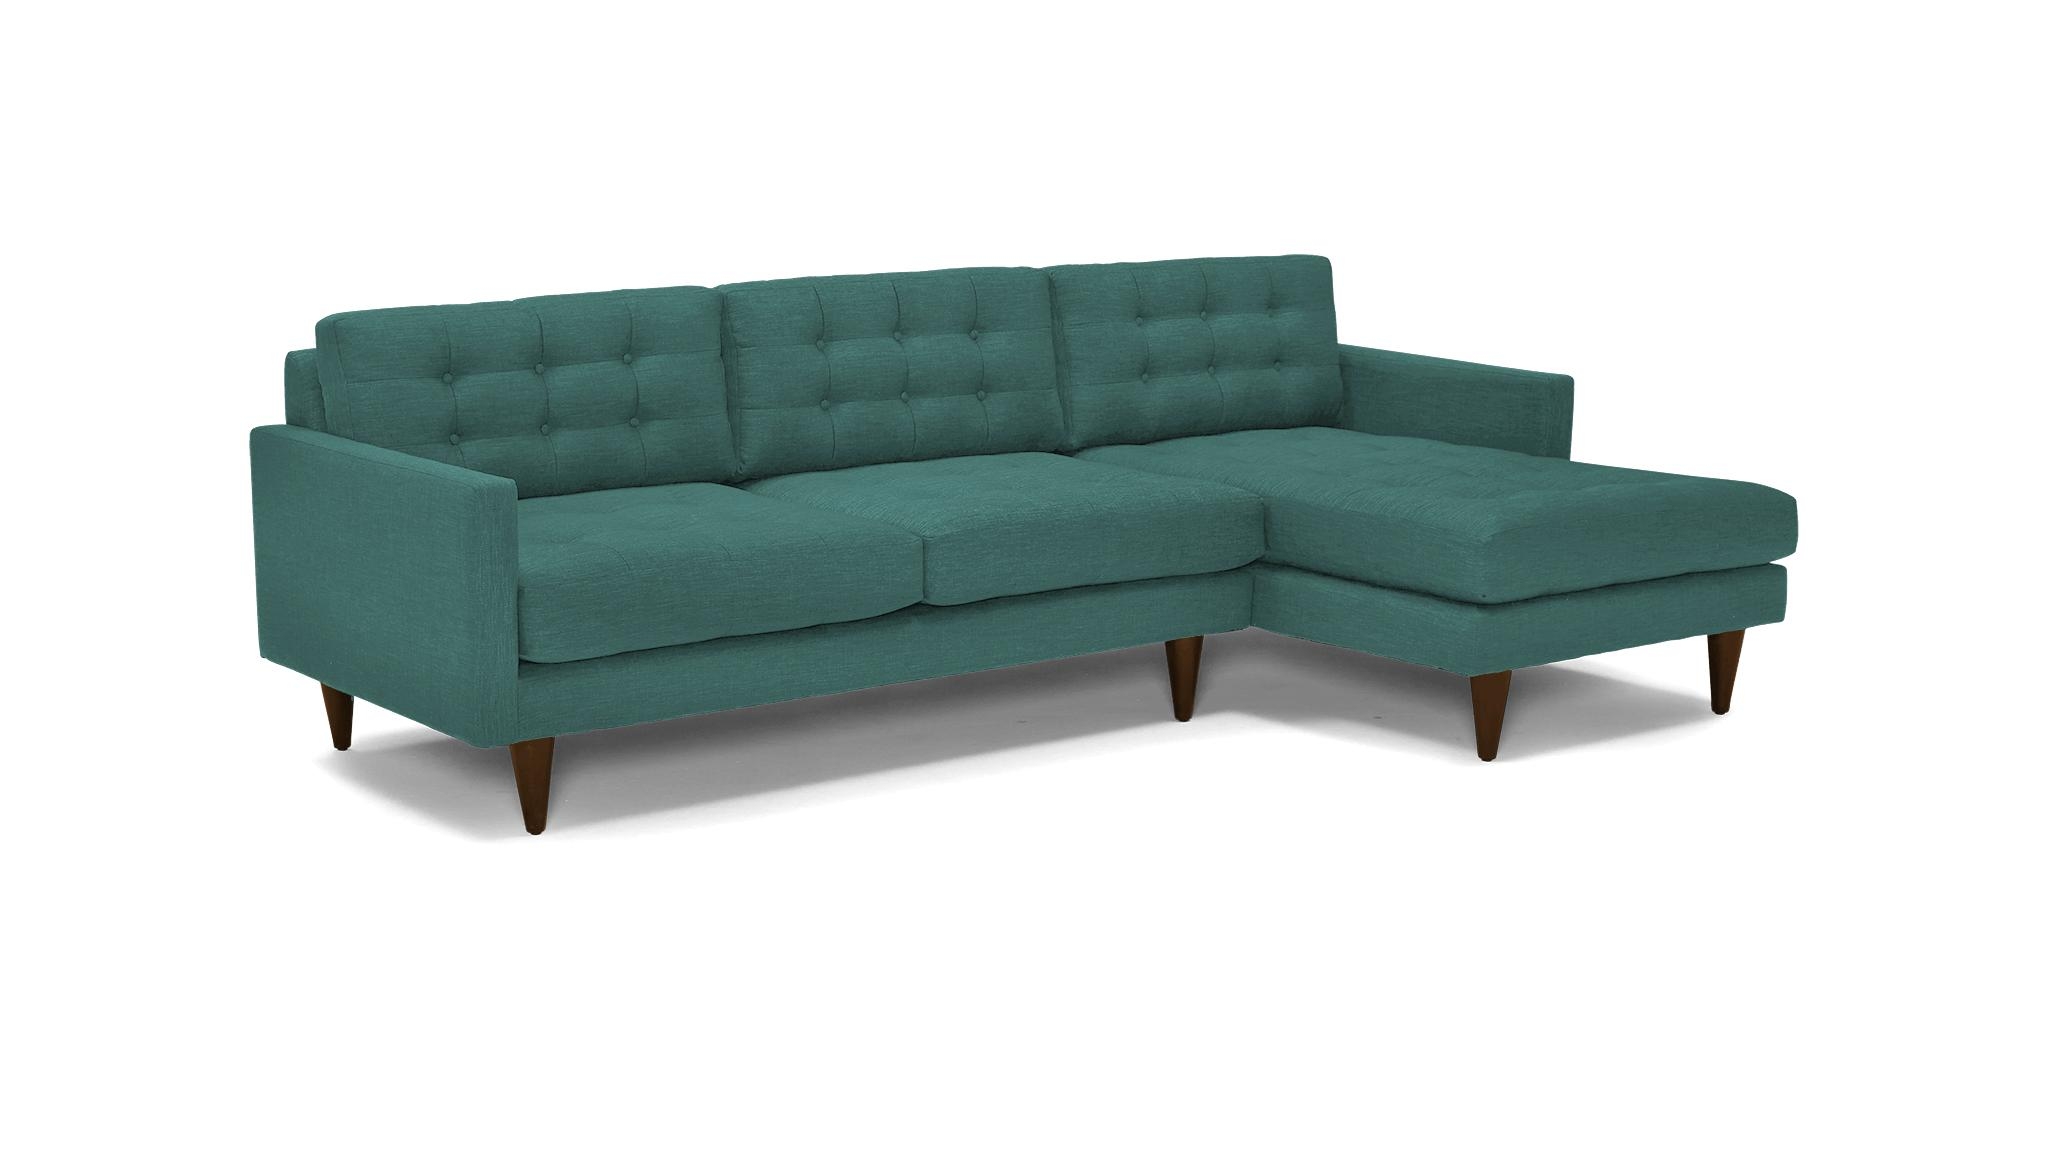 Blue Eliot Mid Century Modern Sectional - Prime Peacock - Mocha - Right - Image 1